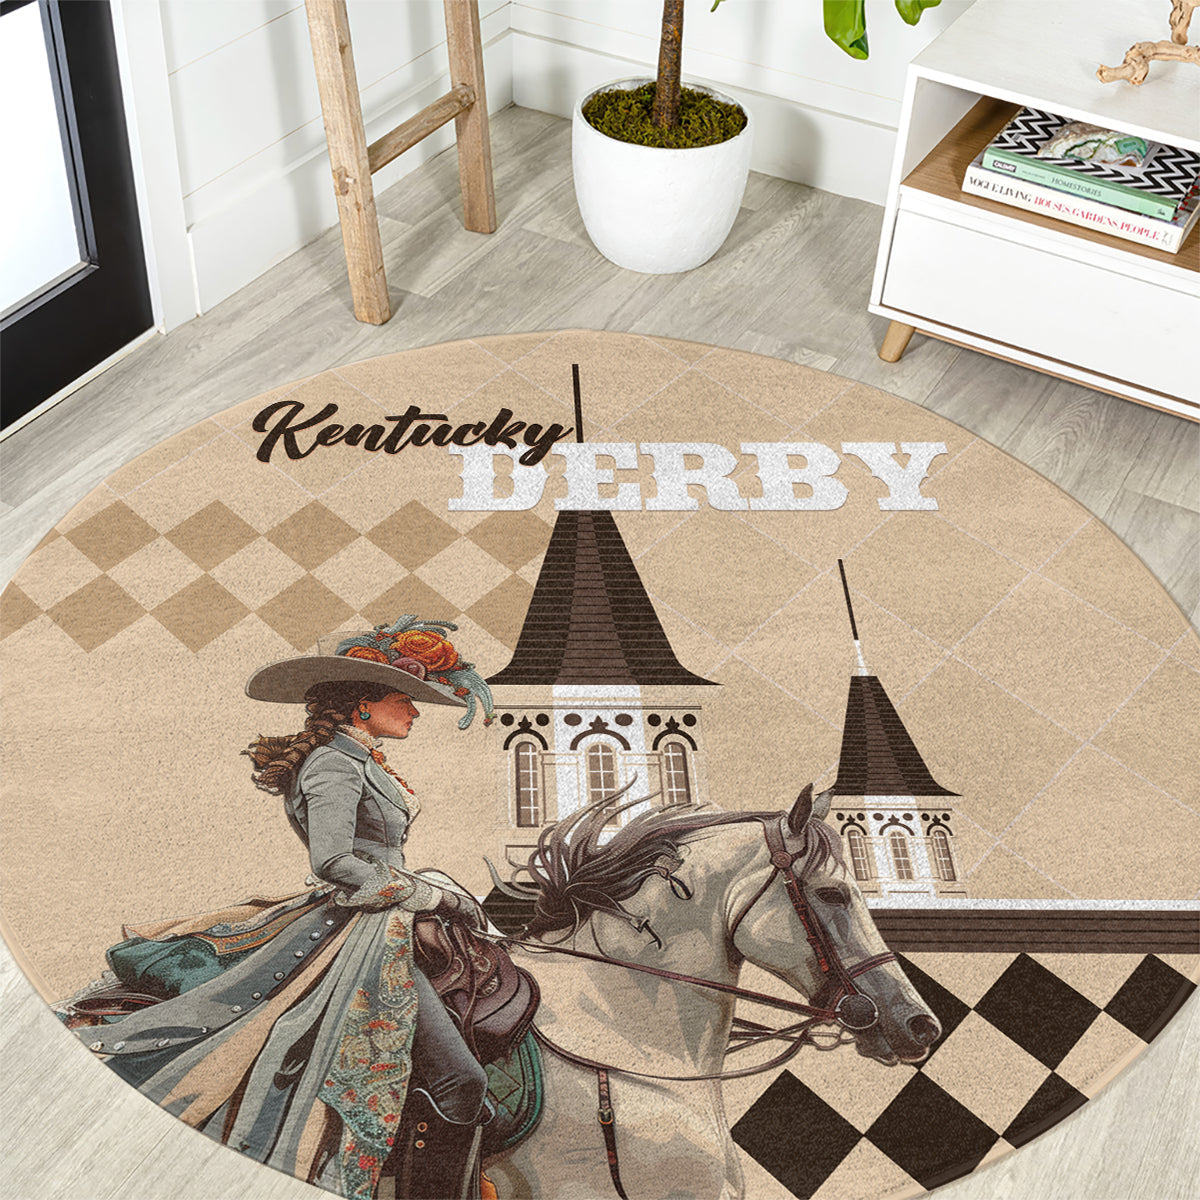 Kentucky Horse Racing Round Carpet Derby Lady Riding Horse Twin Spires